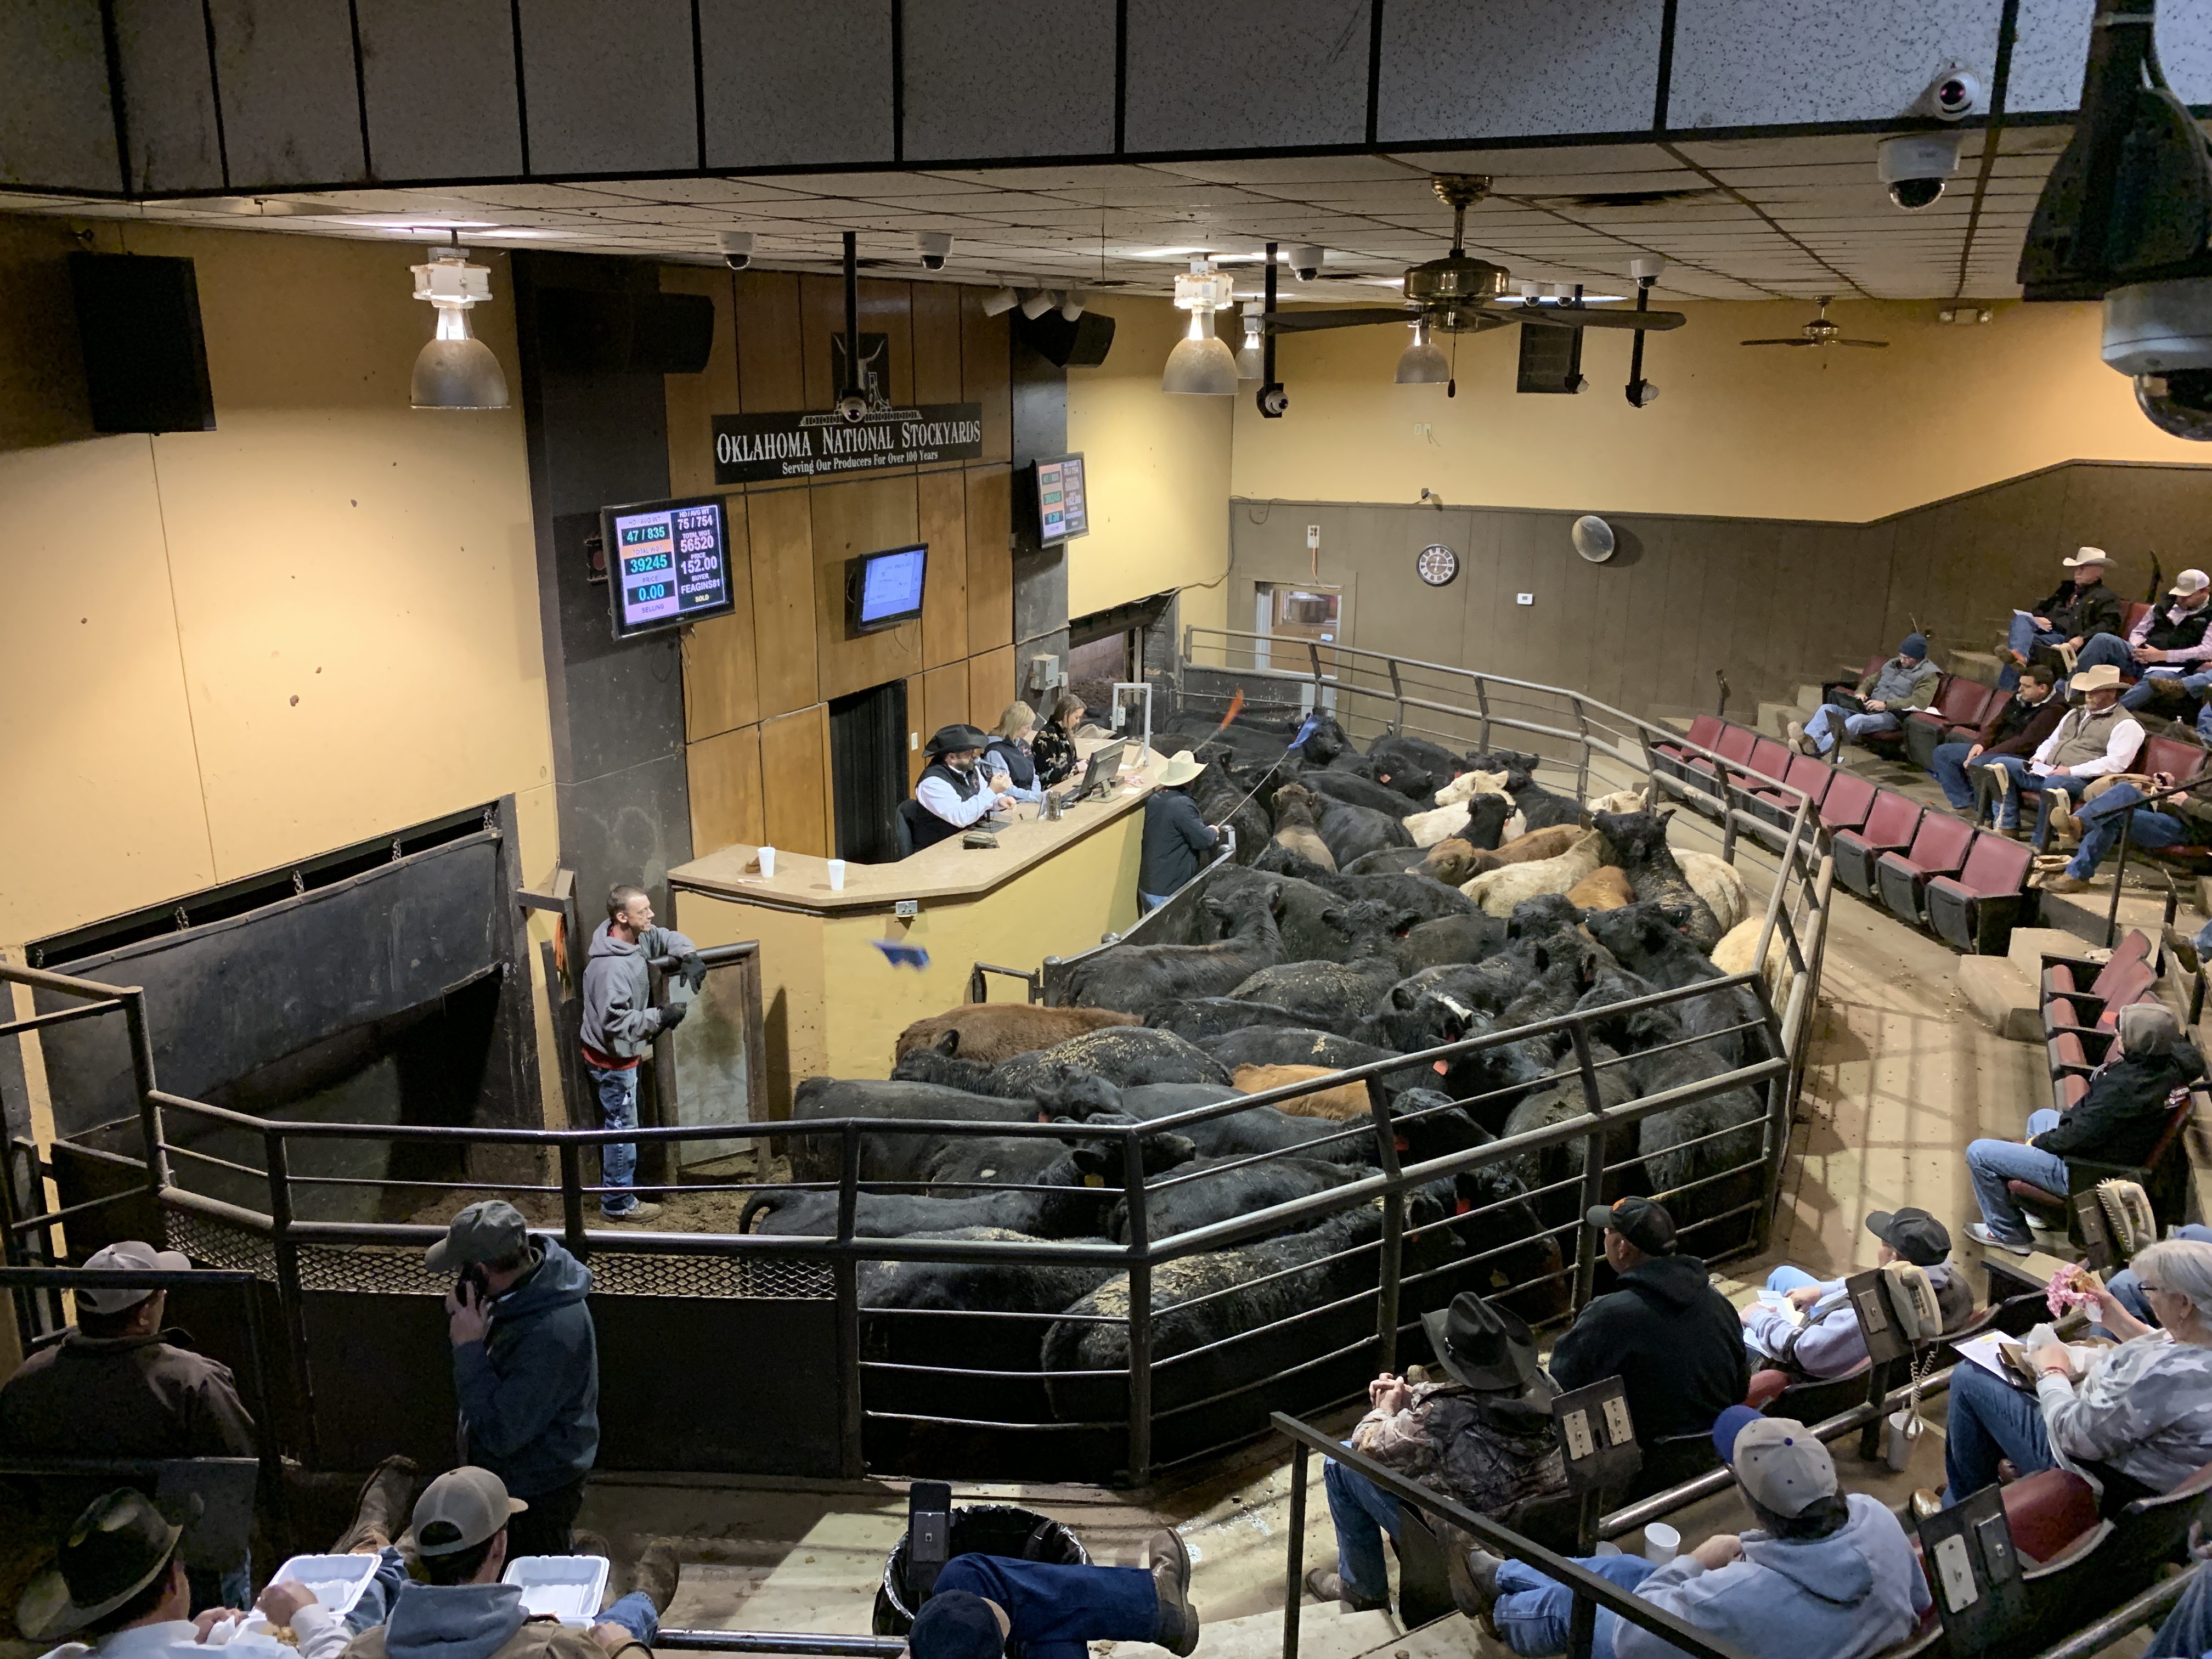 Final Stocker Feeder Sale of 2022 at Oklahoma National Saw $4 to $8 Higher Calf Prices and Steady to $4 Higher Yearling Bids